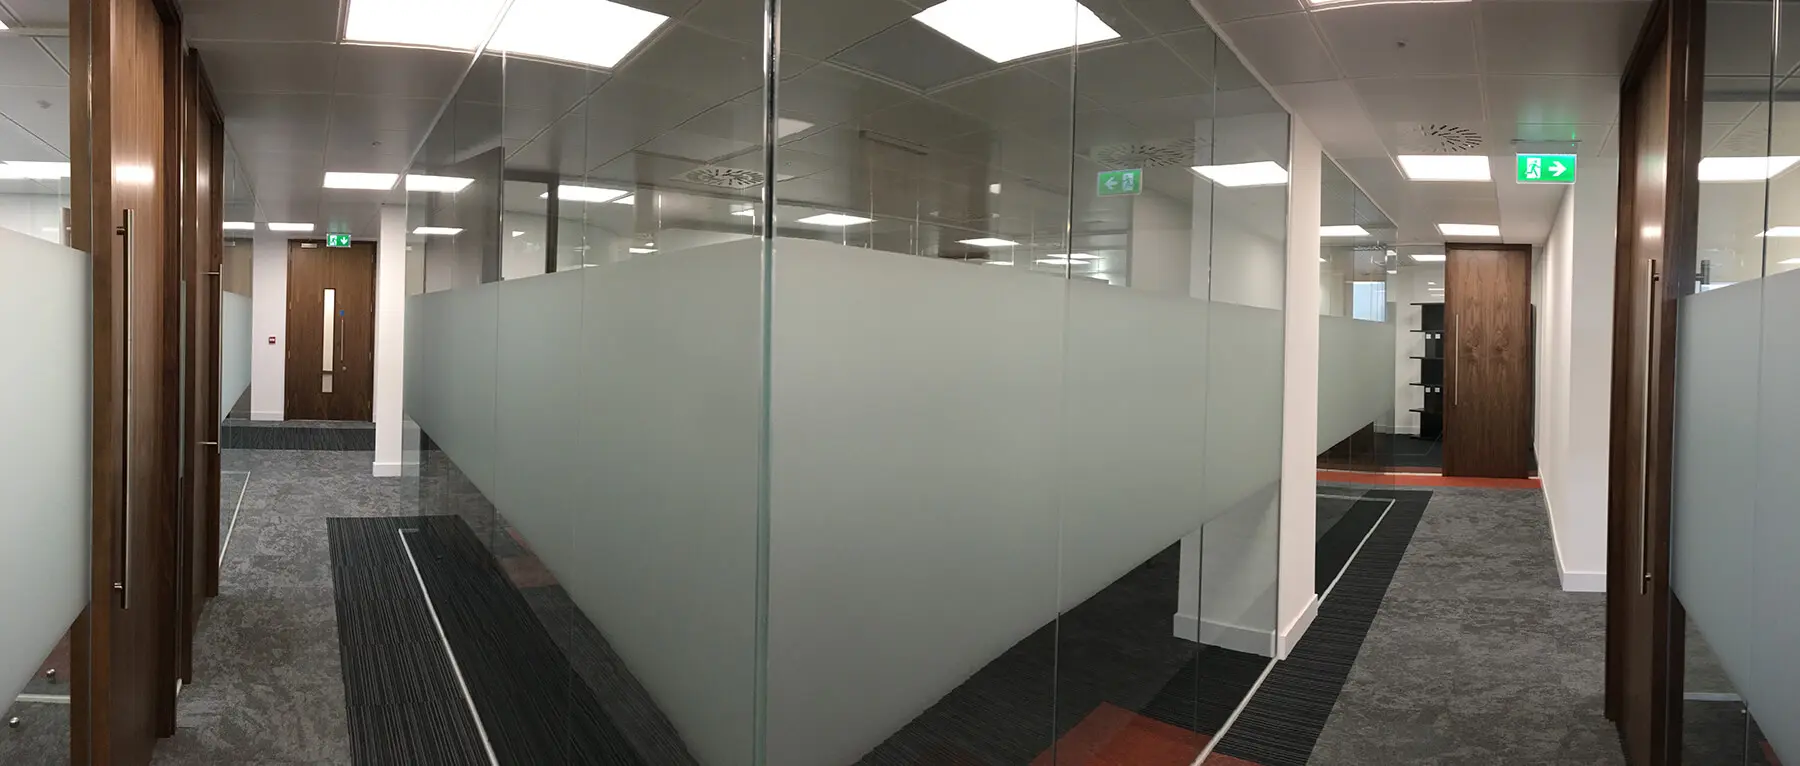 Office glass walls with high solid band